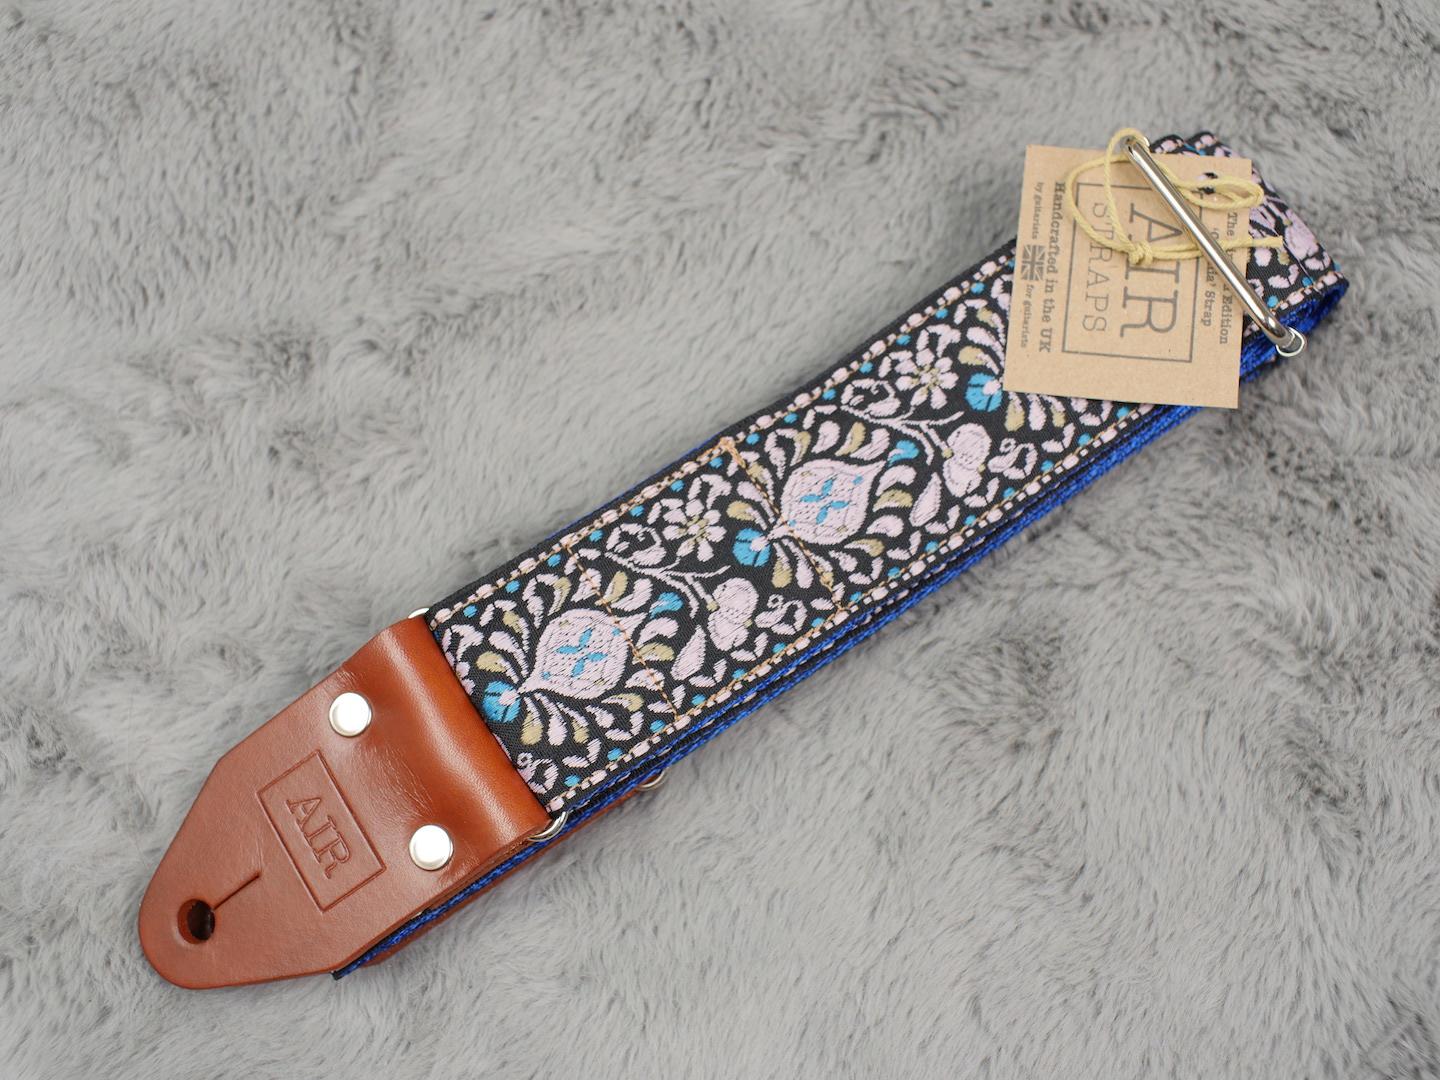 Air Straps Limited Edition 'Oceania' Guitar Strap